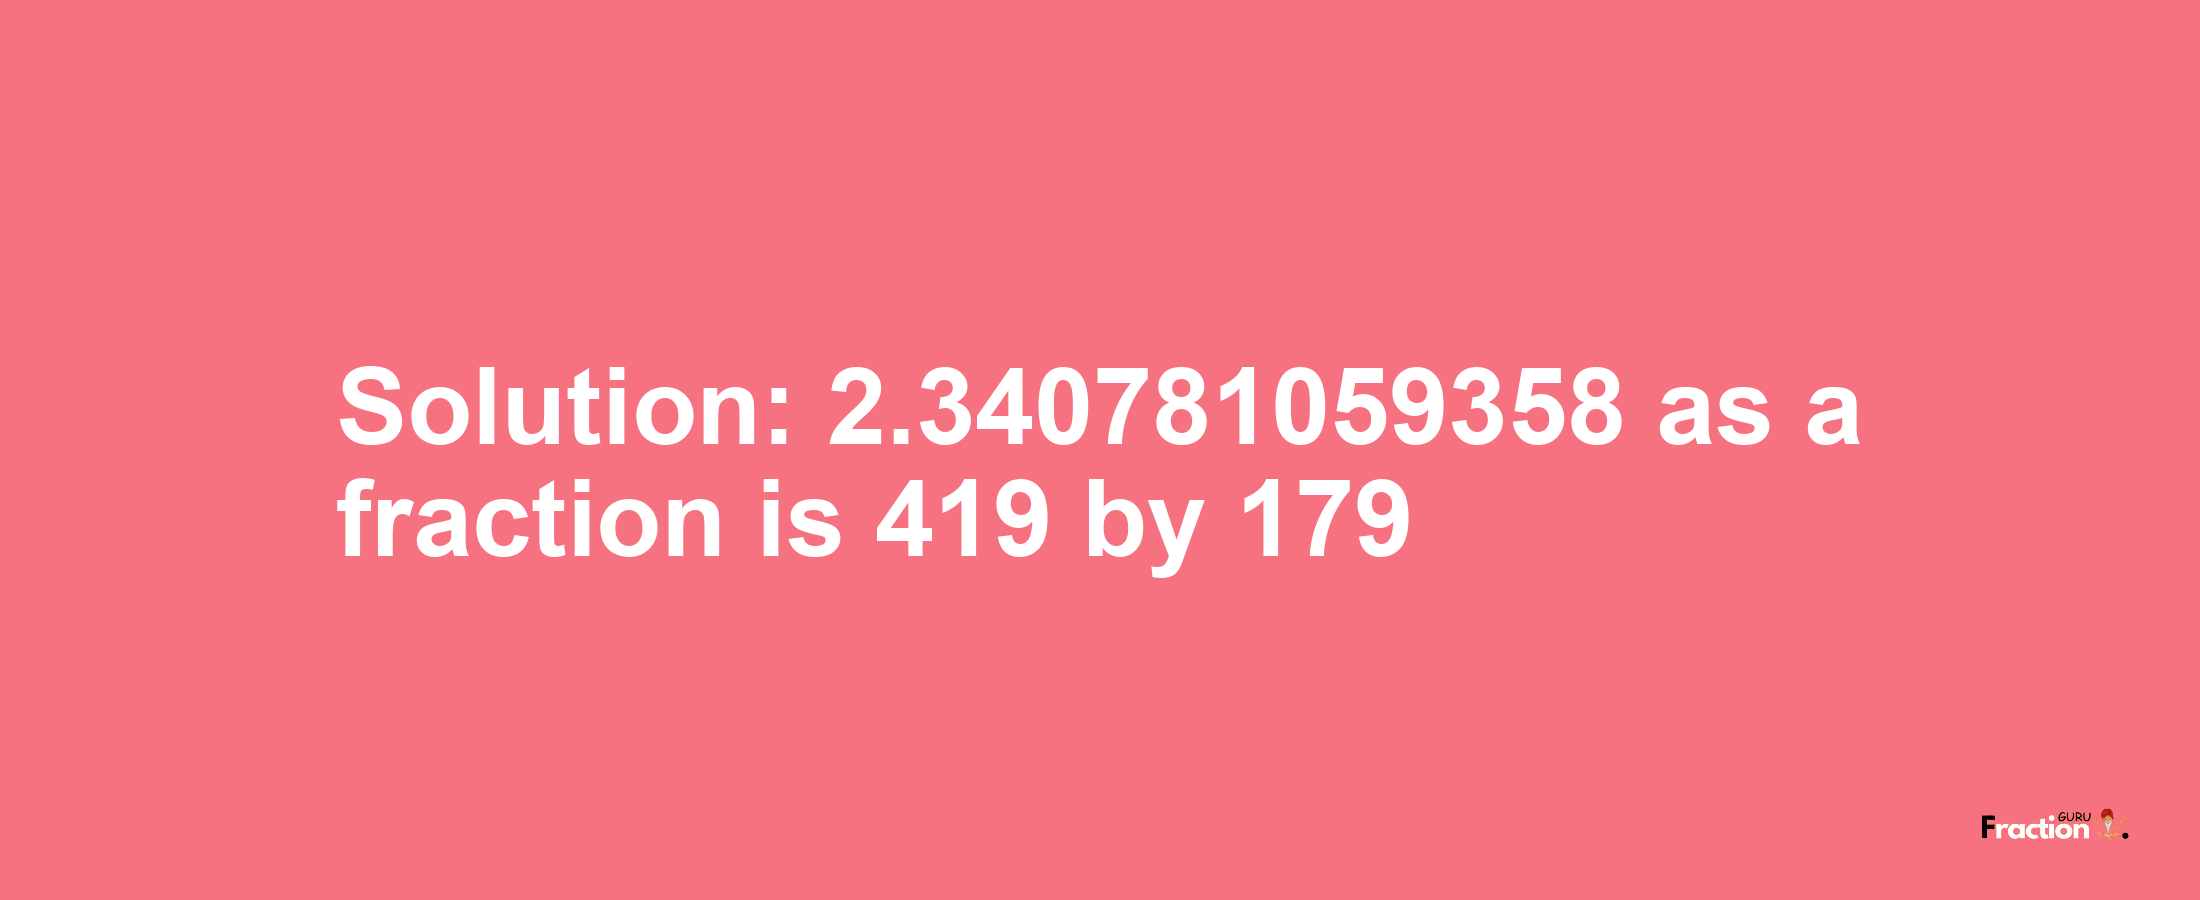 Solution:2.340781059358 as a fraction is 419/179